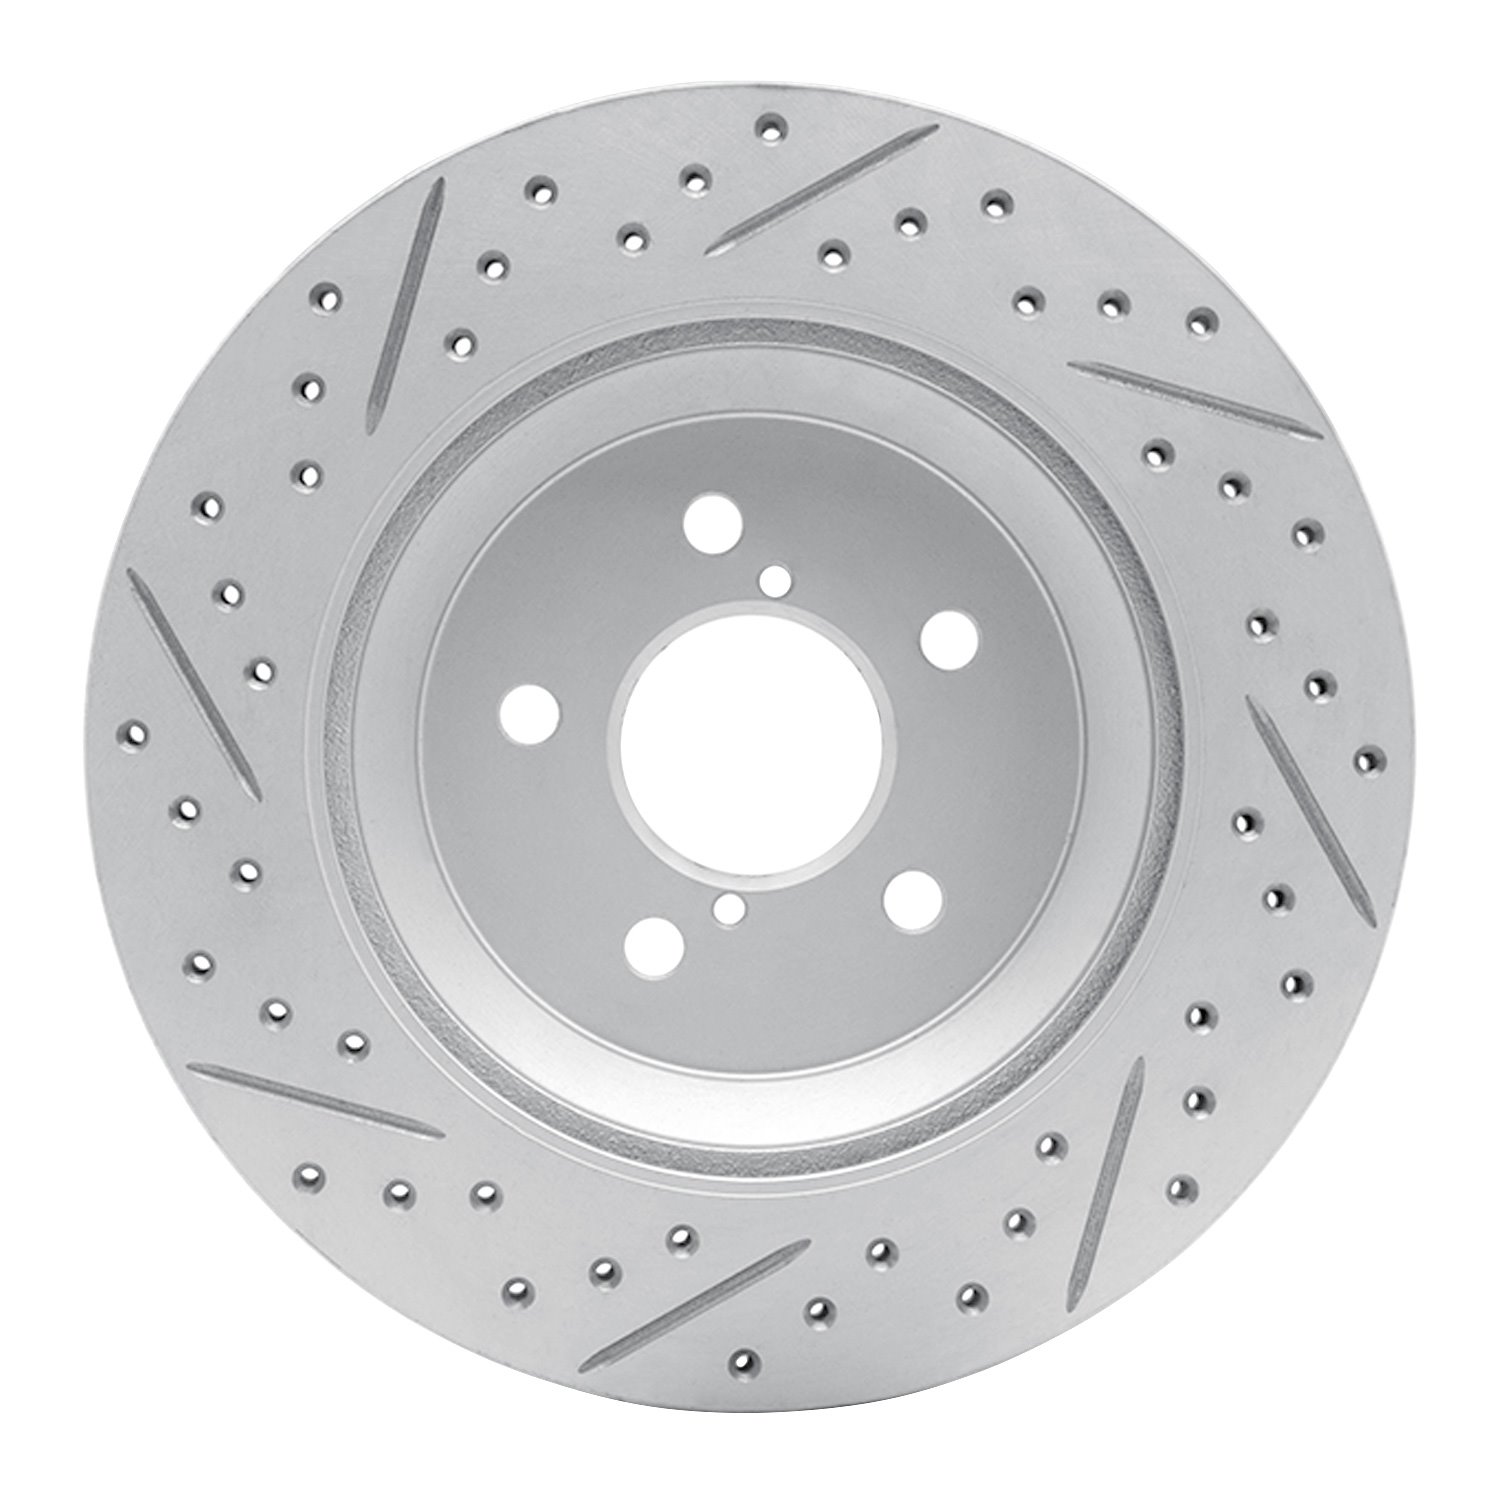 830-13047R Geoperformance Drilled/Slotted Brake Rotor, Fits Select Subaru, Position: Rear Right